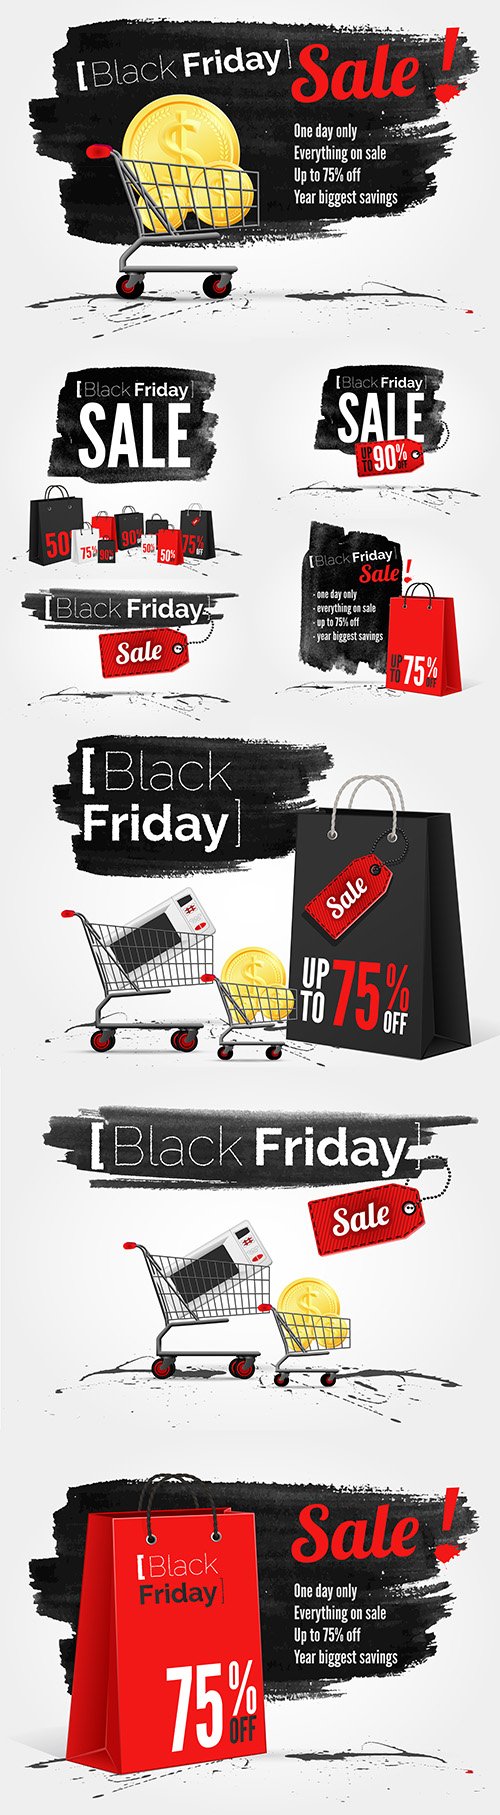 Black Friday watercolor banner with inks of ink and shopping bag